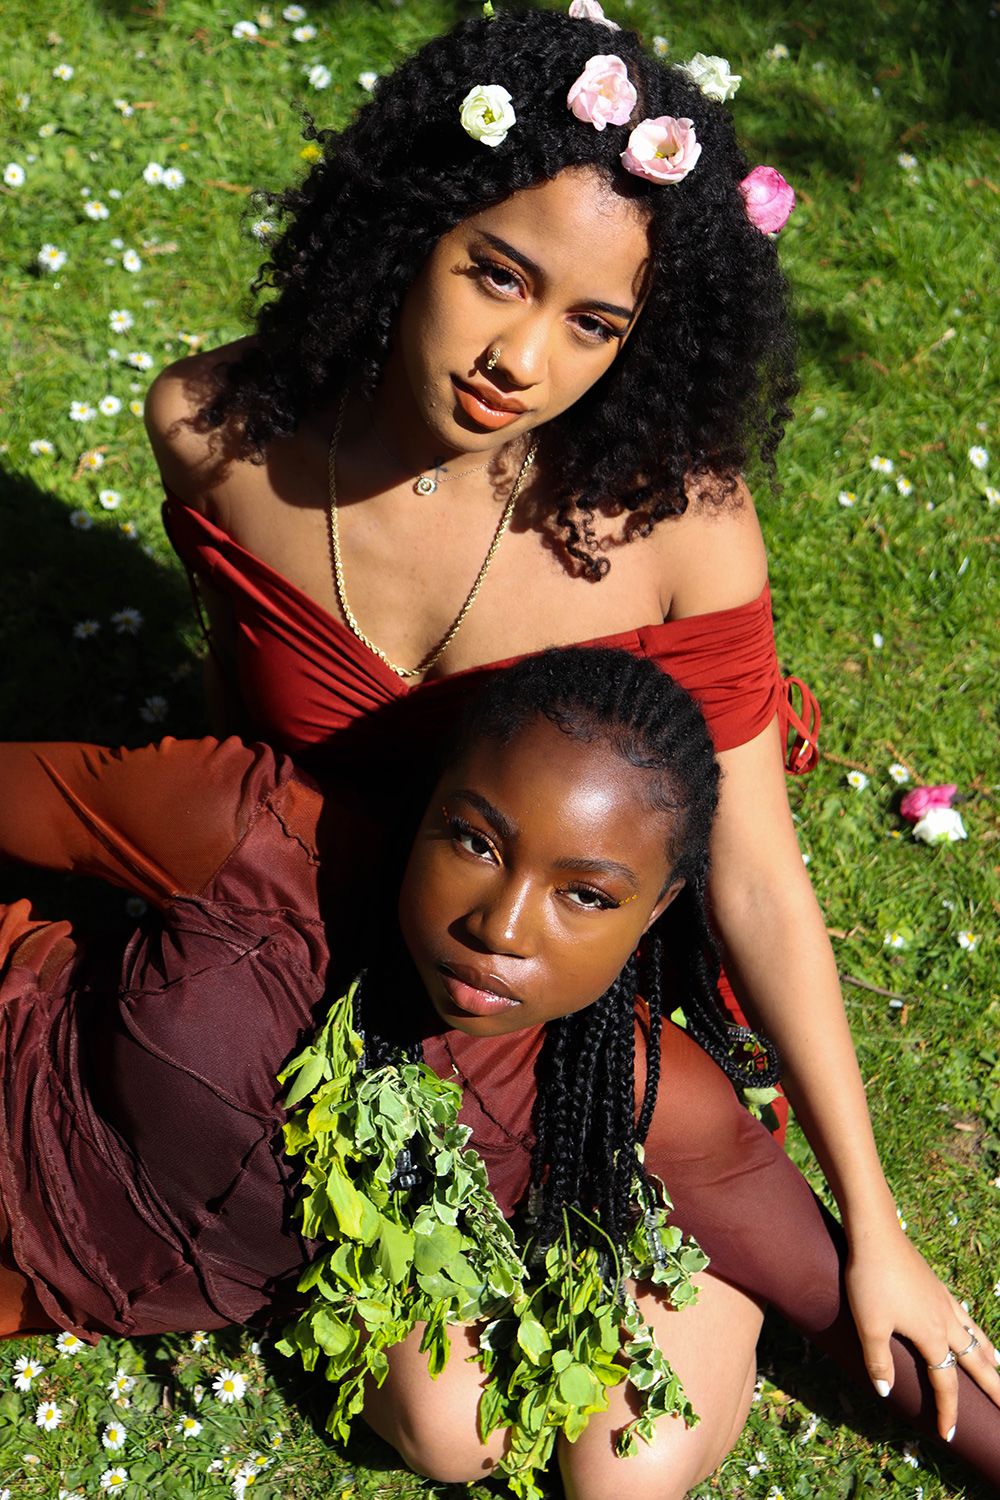 Photograph of two models surrounded by grass and flowers.